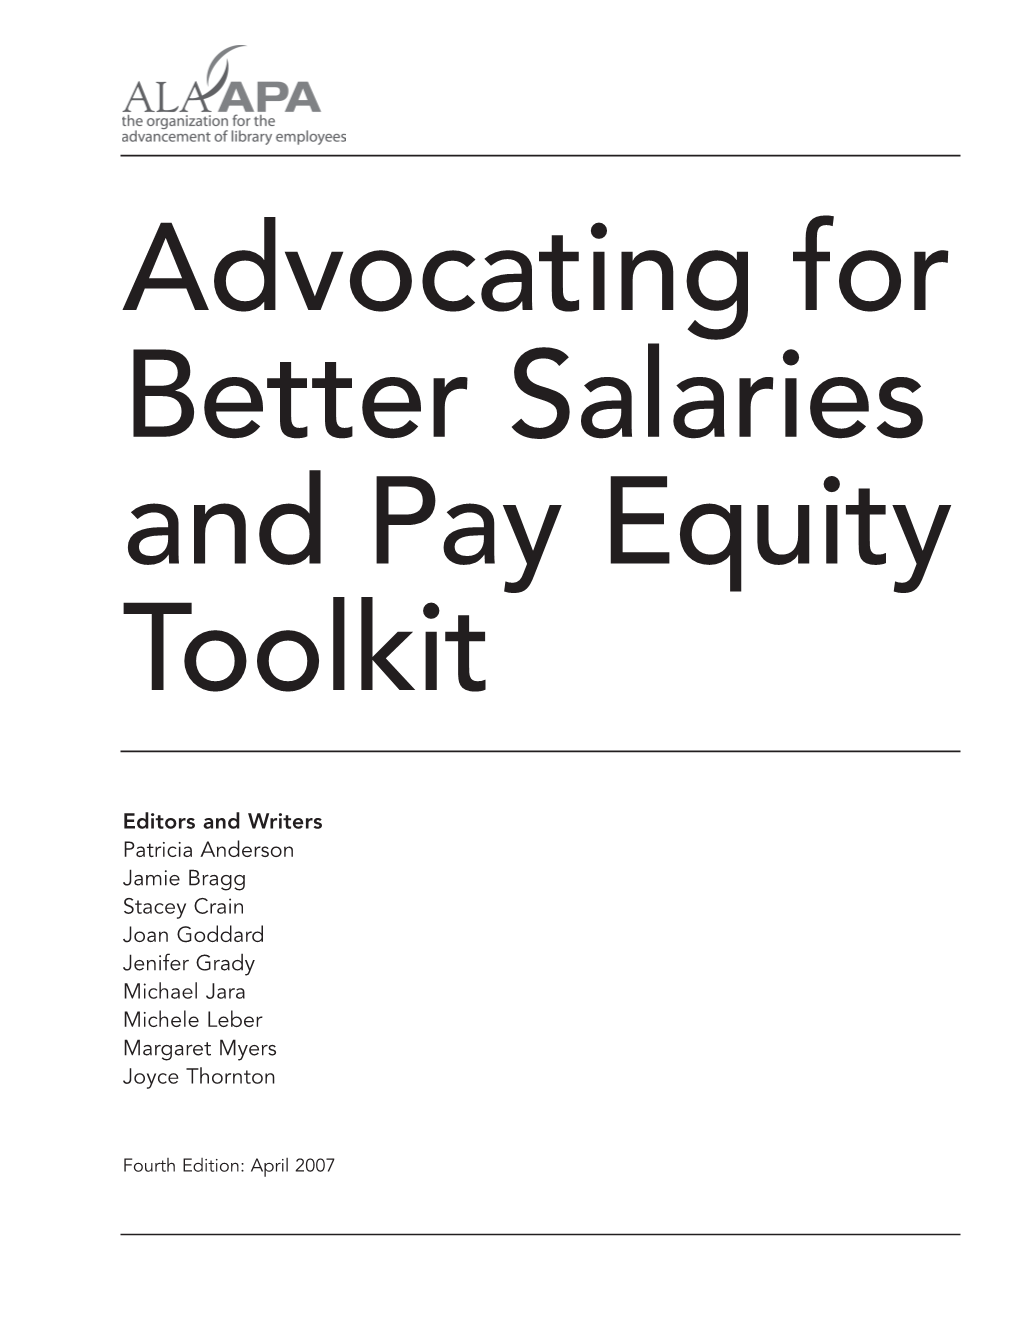 Better Salaries and Pay Equity Toolkit